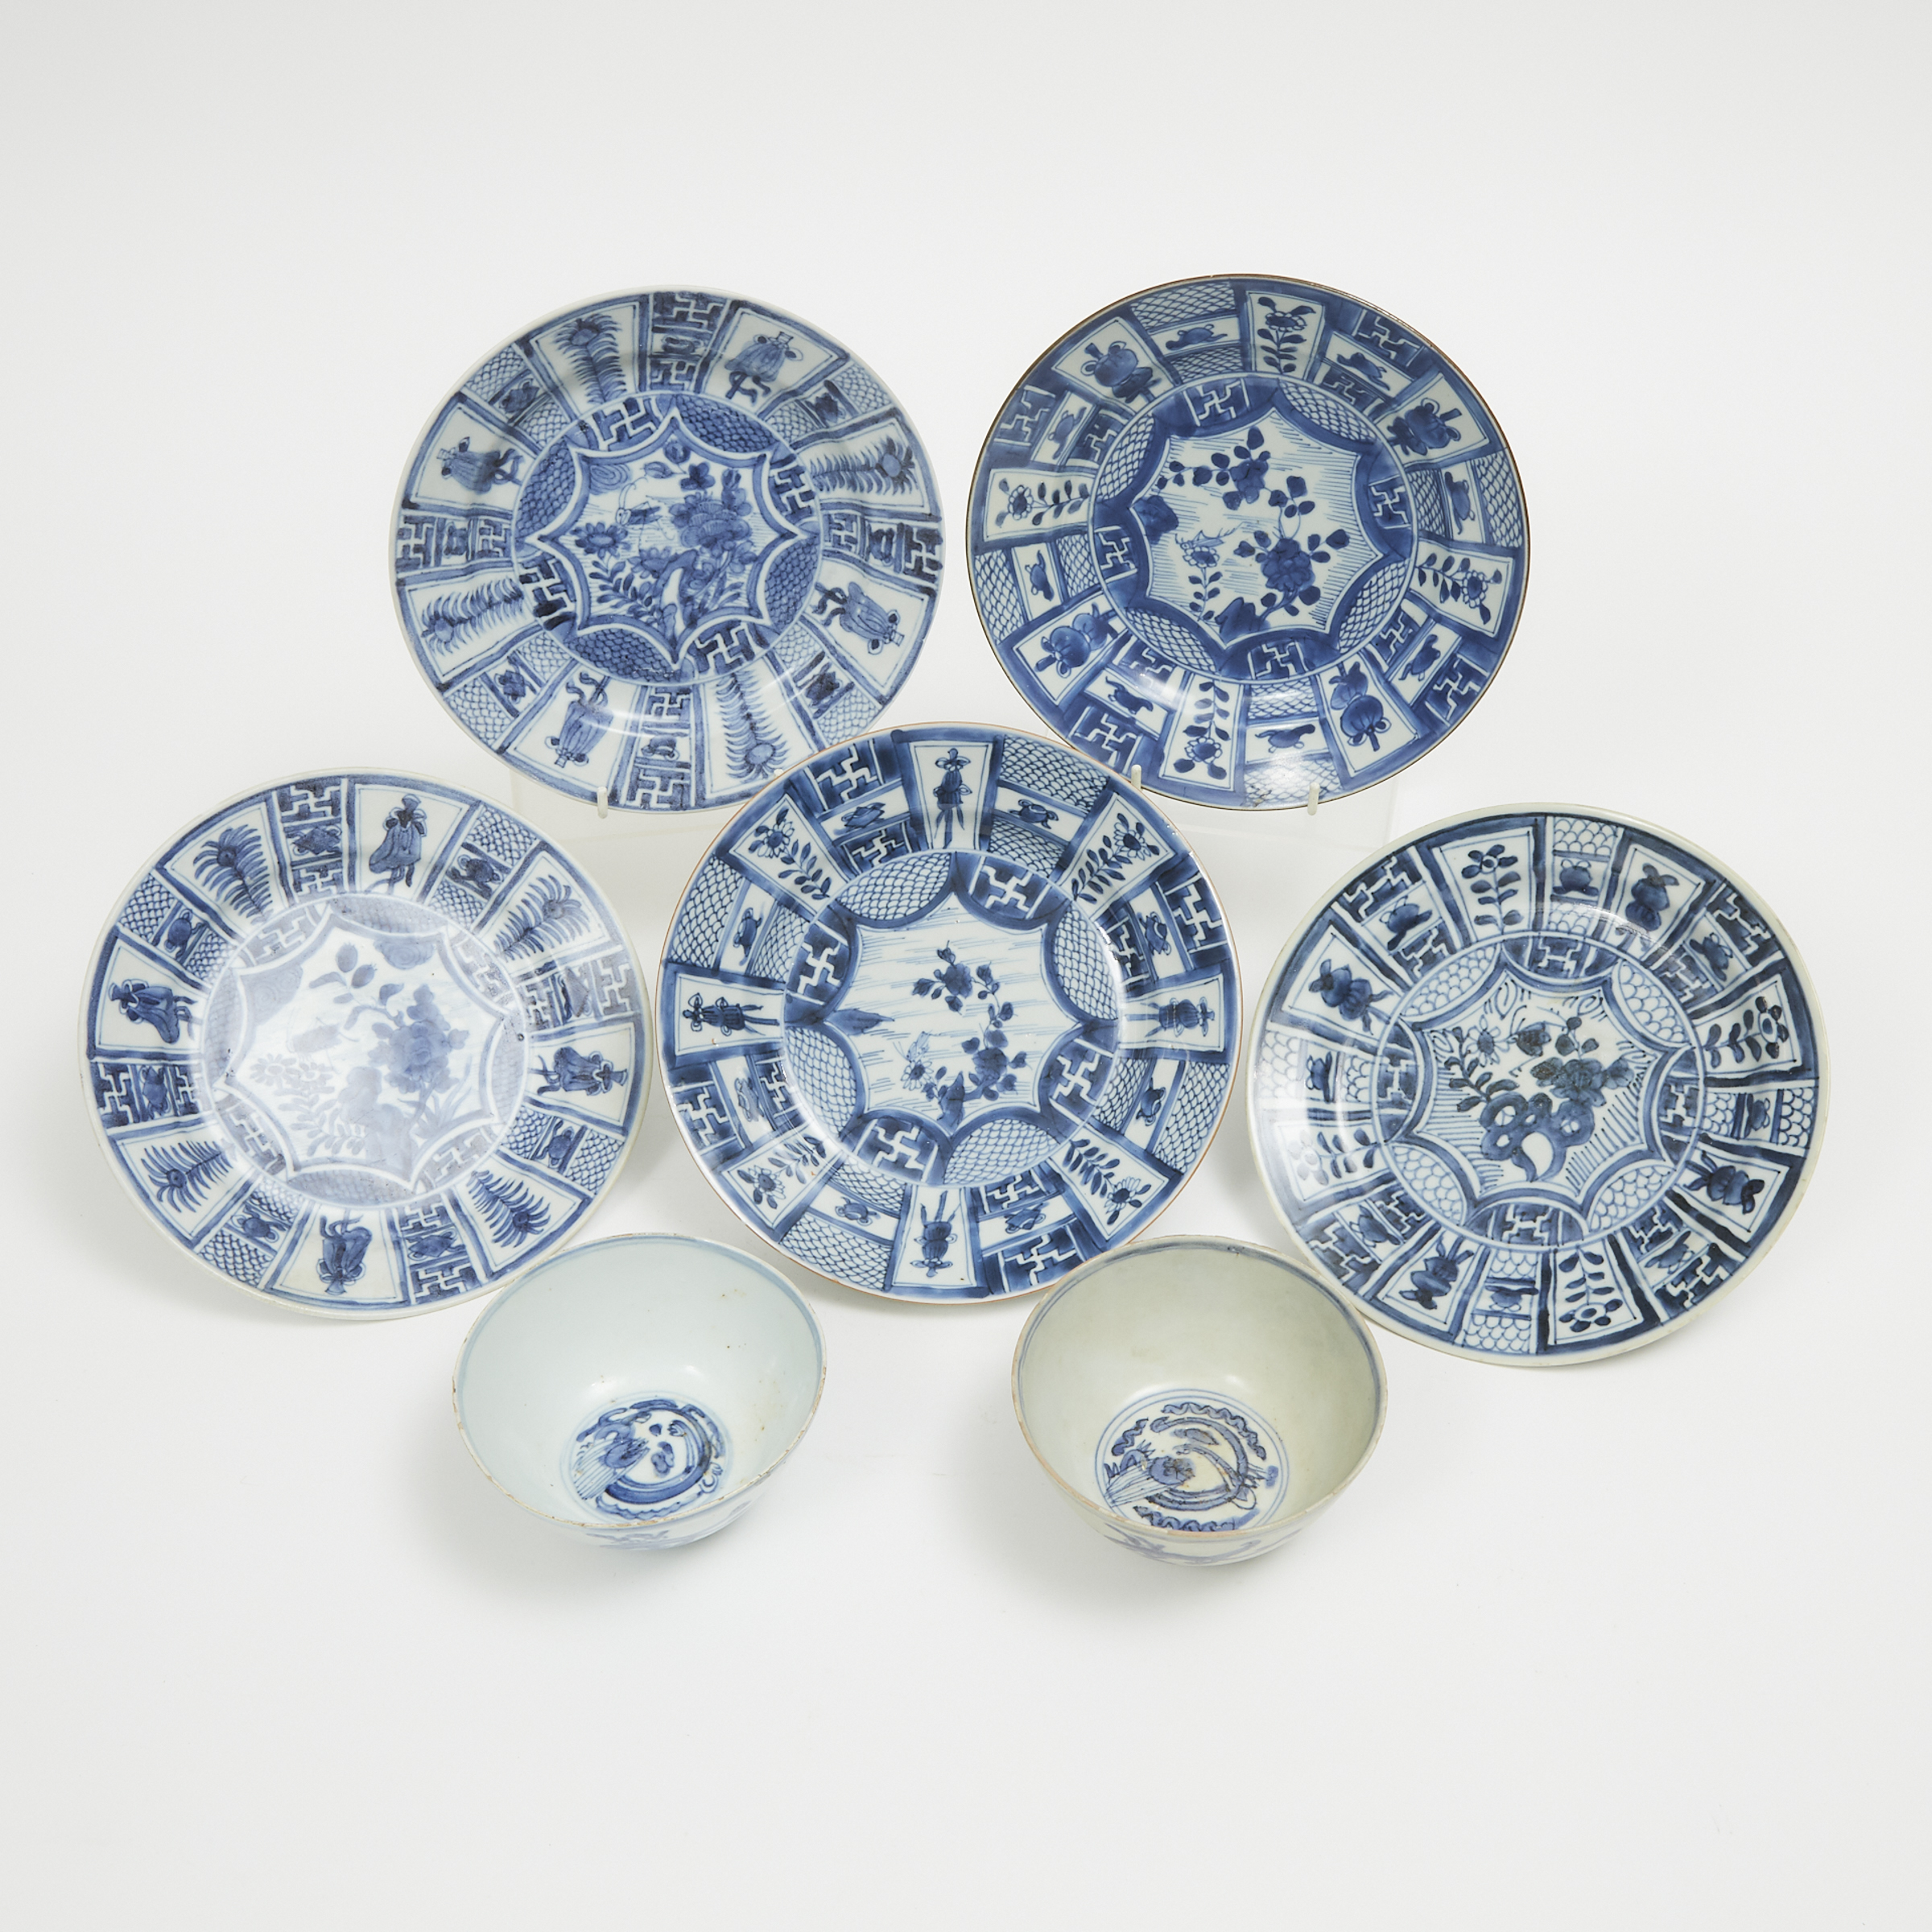 A Group of Seven Shipwreck Porcelain Wares, 17th Century 